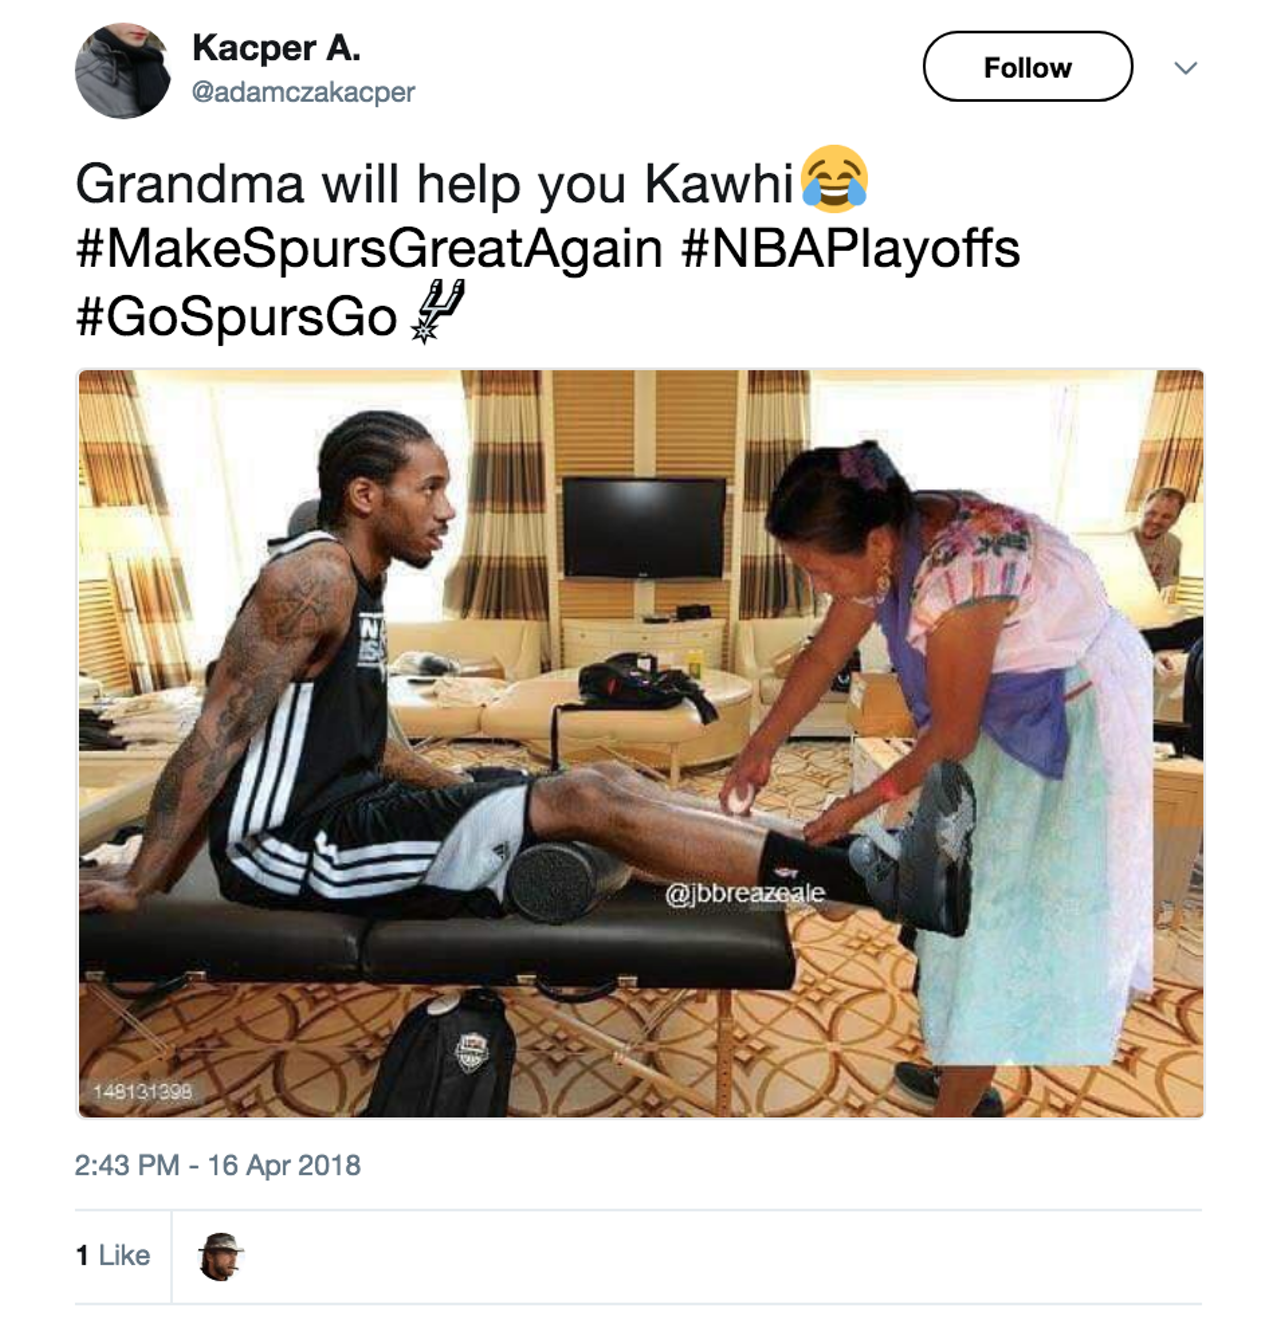 Twitter Roasts, Cries For Kawhi Leonard, Who Won't Make a Playoffs Appearance This Year